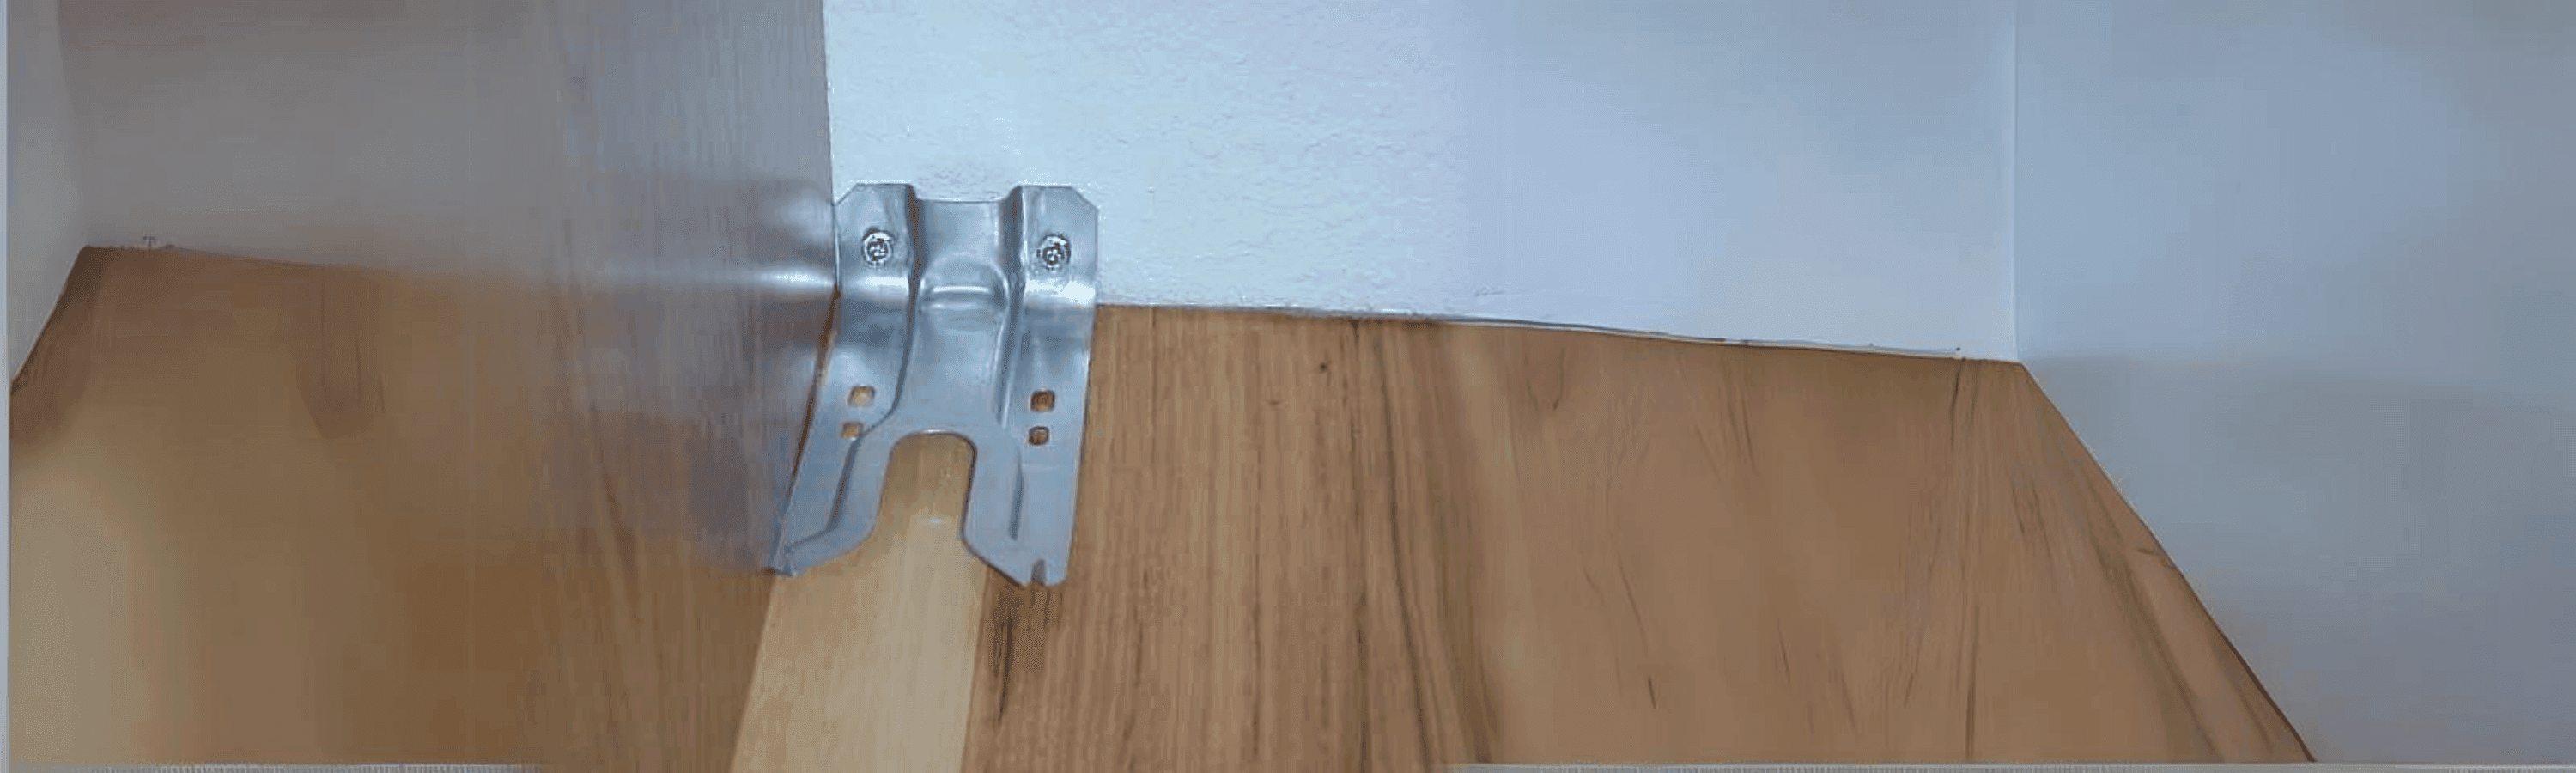 The Importance of Stove Anti-Tip Brackets in Maintaining Home Safety